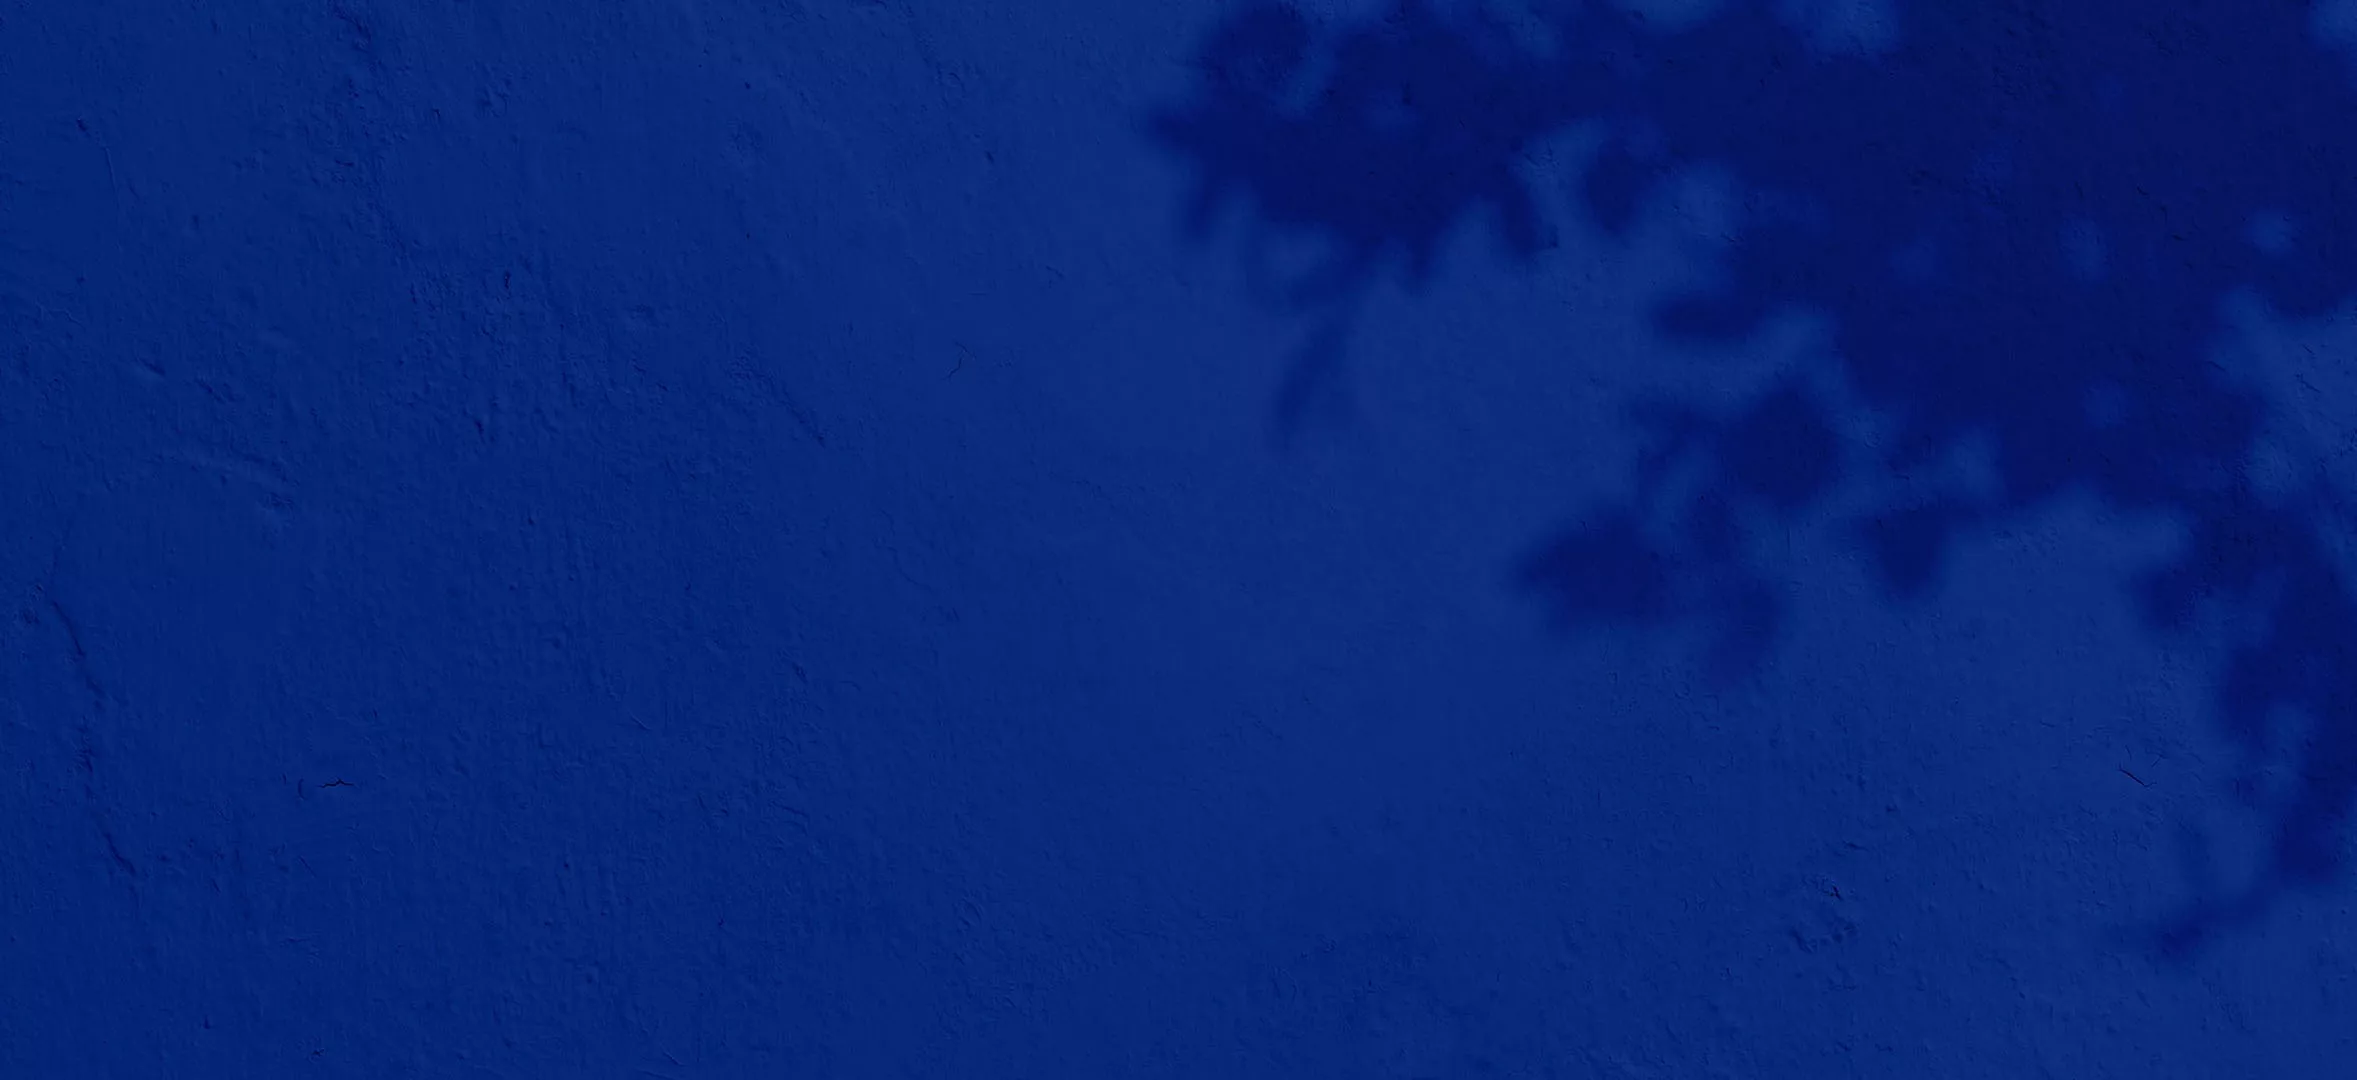 blue colored wall background with tree leaves shadow.